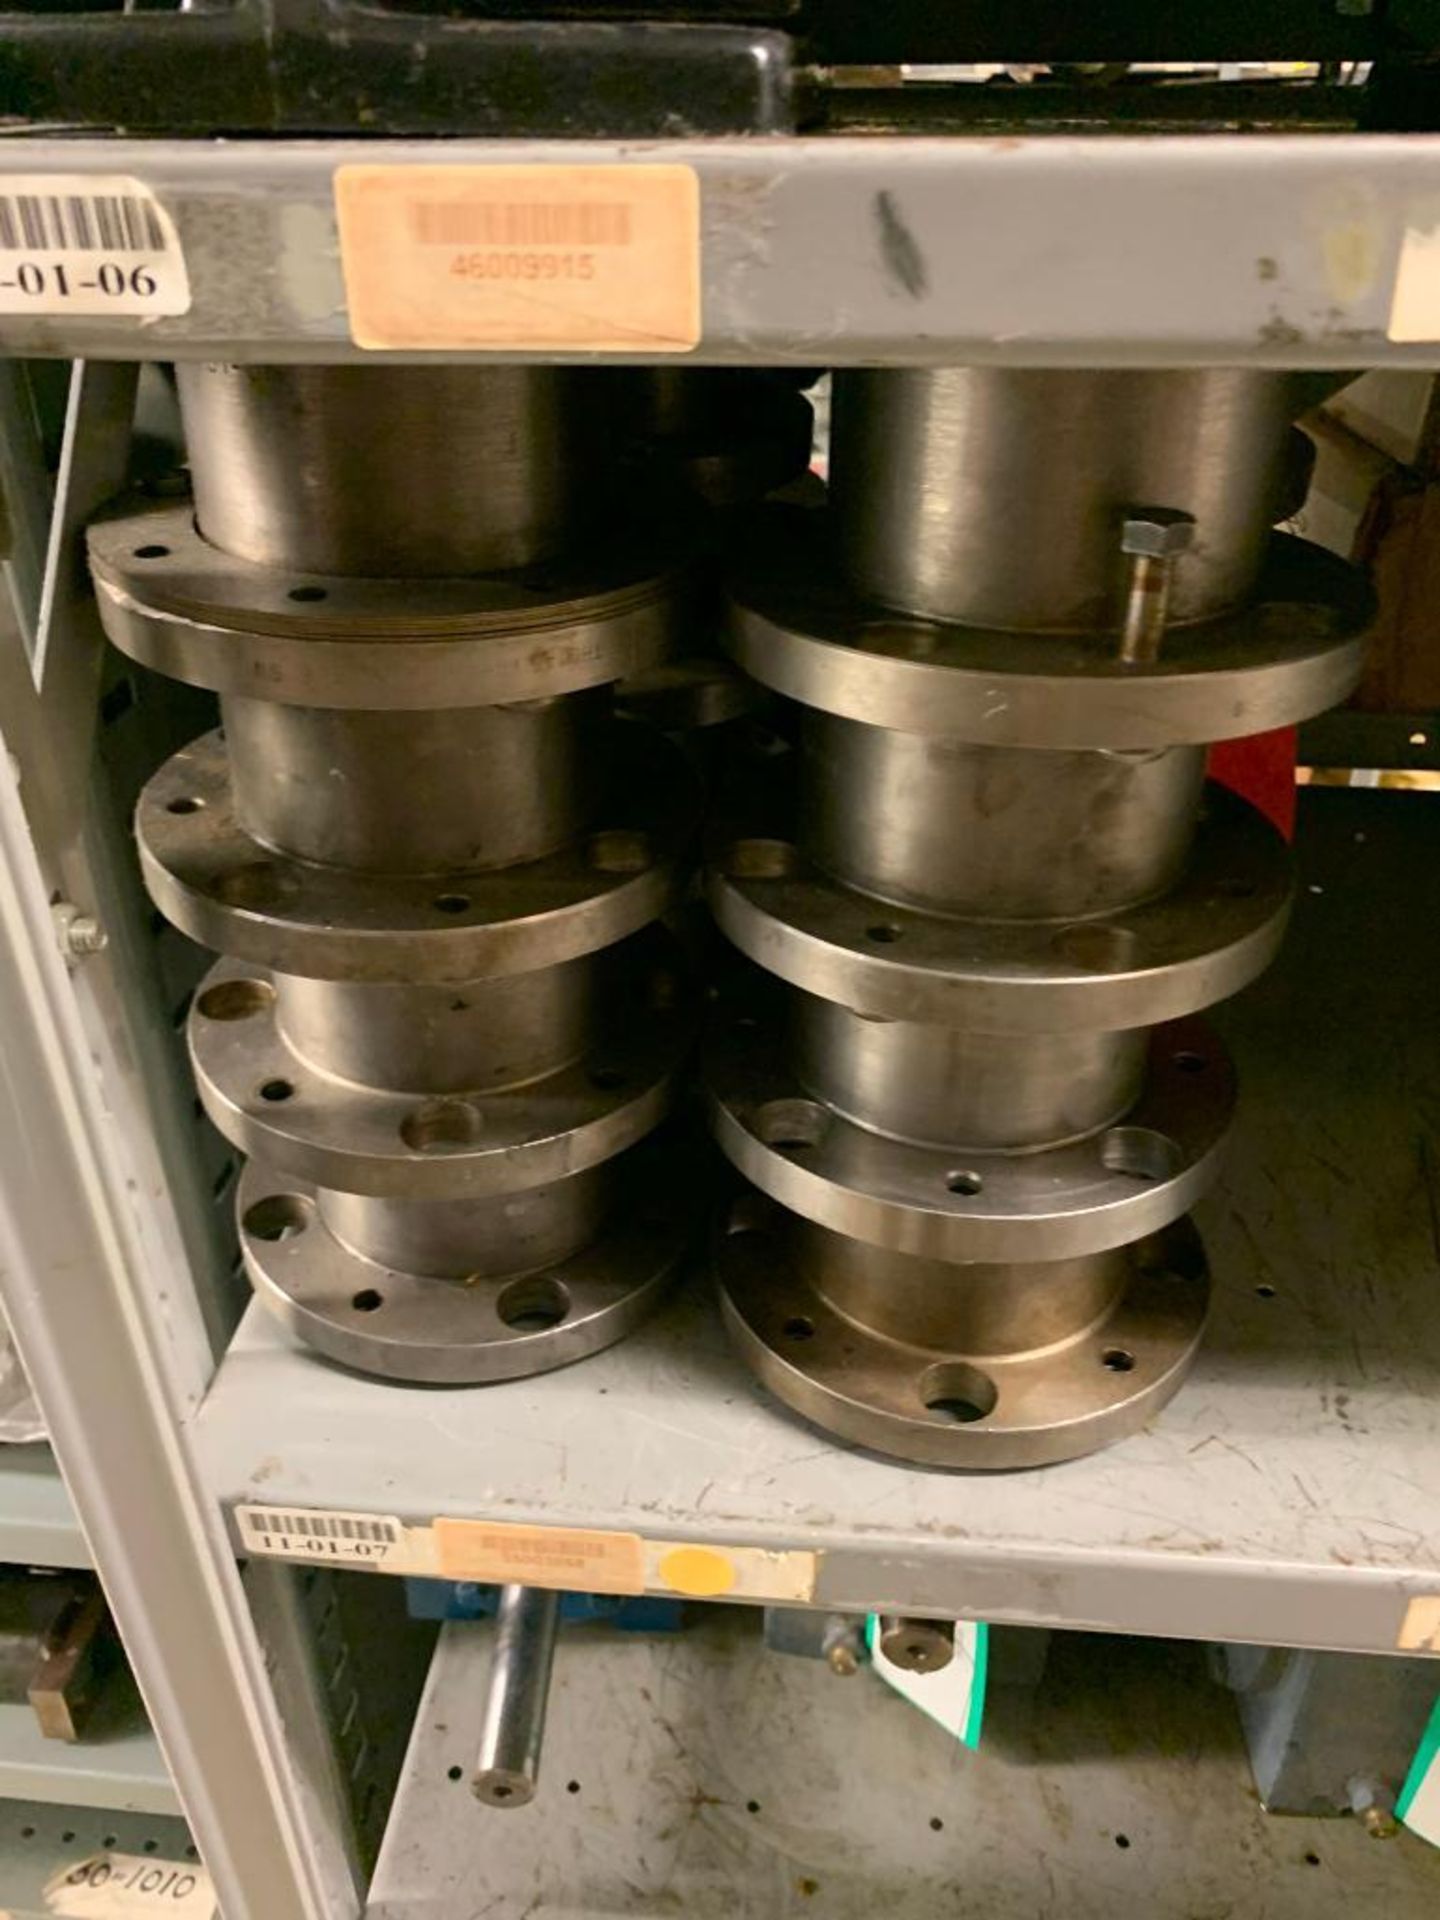 (8x) Bays of Clip Style Shelving w/ Content of Assorted Sleeves, Eaton/ Vickers Valves, Bearing Hous - Image 12 of 45